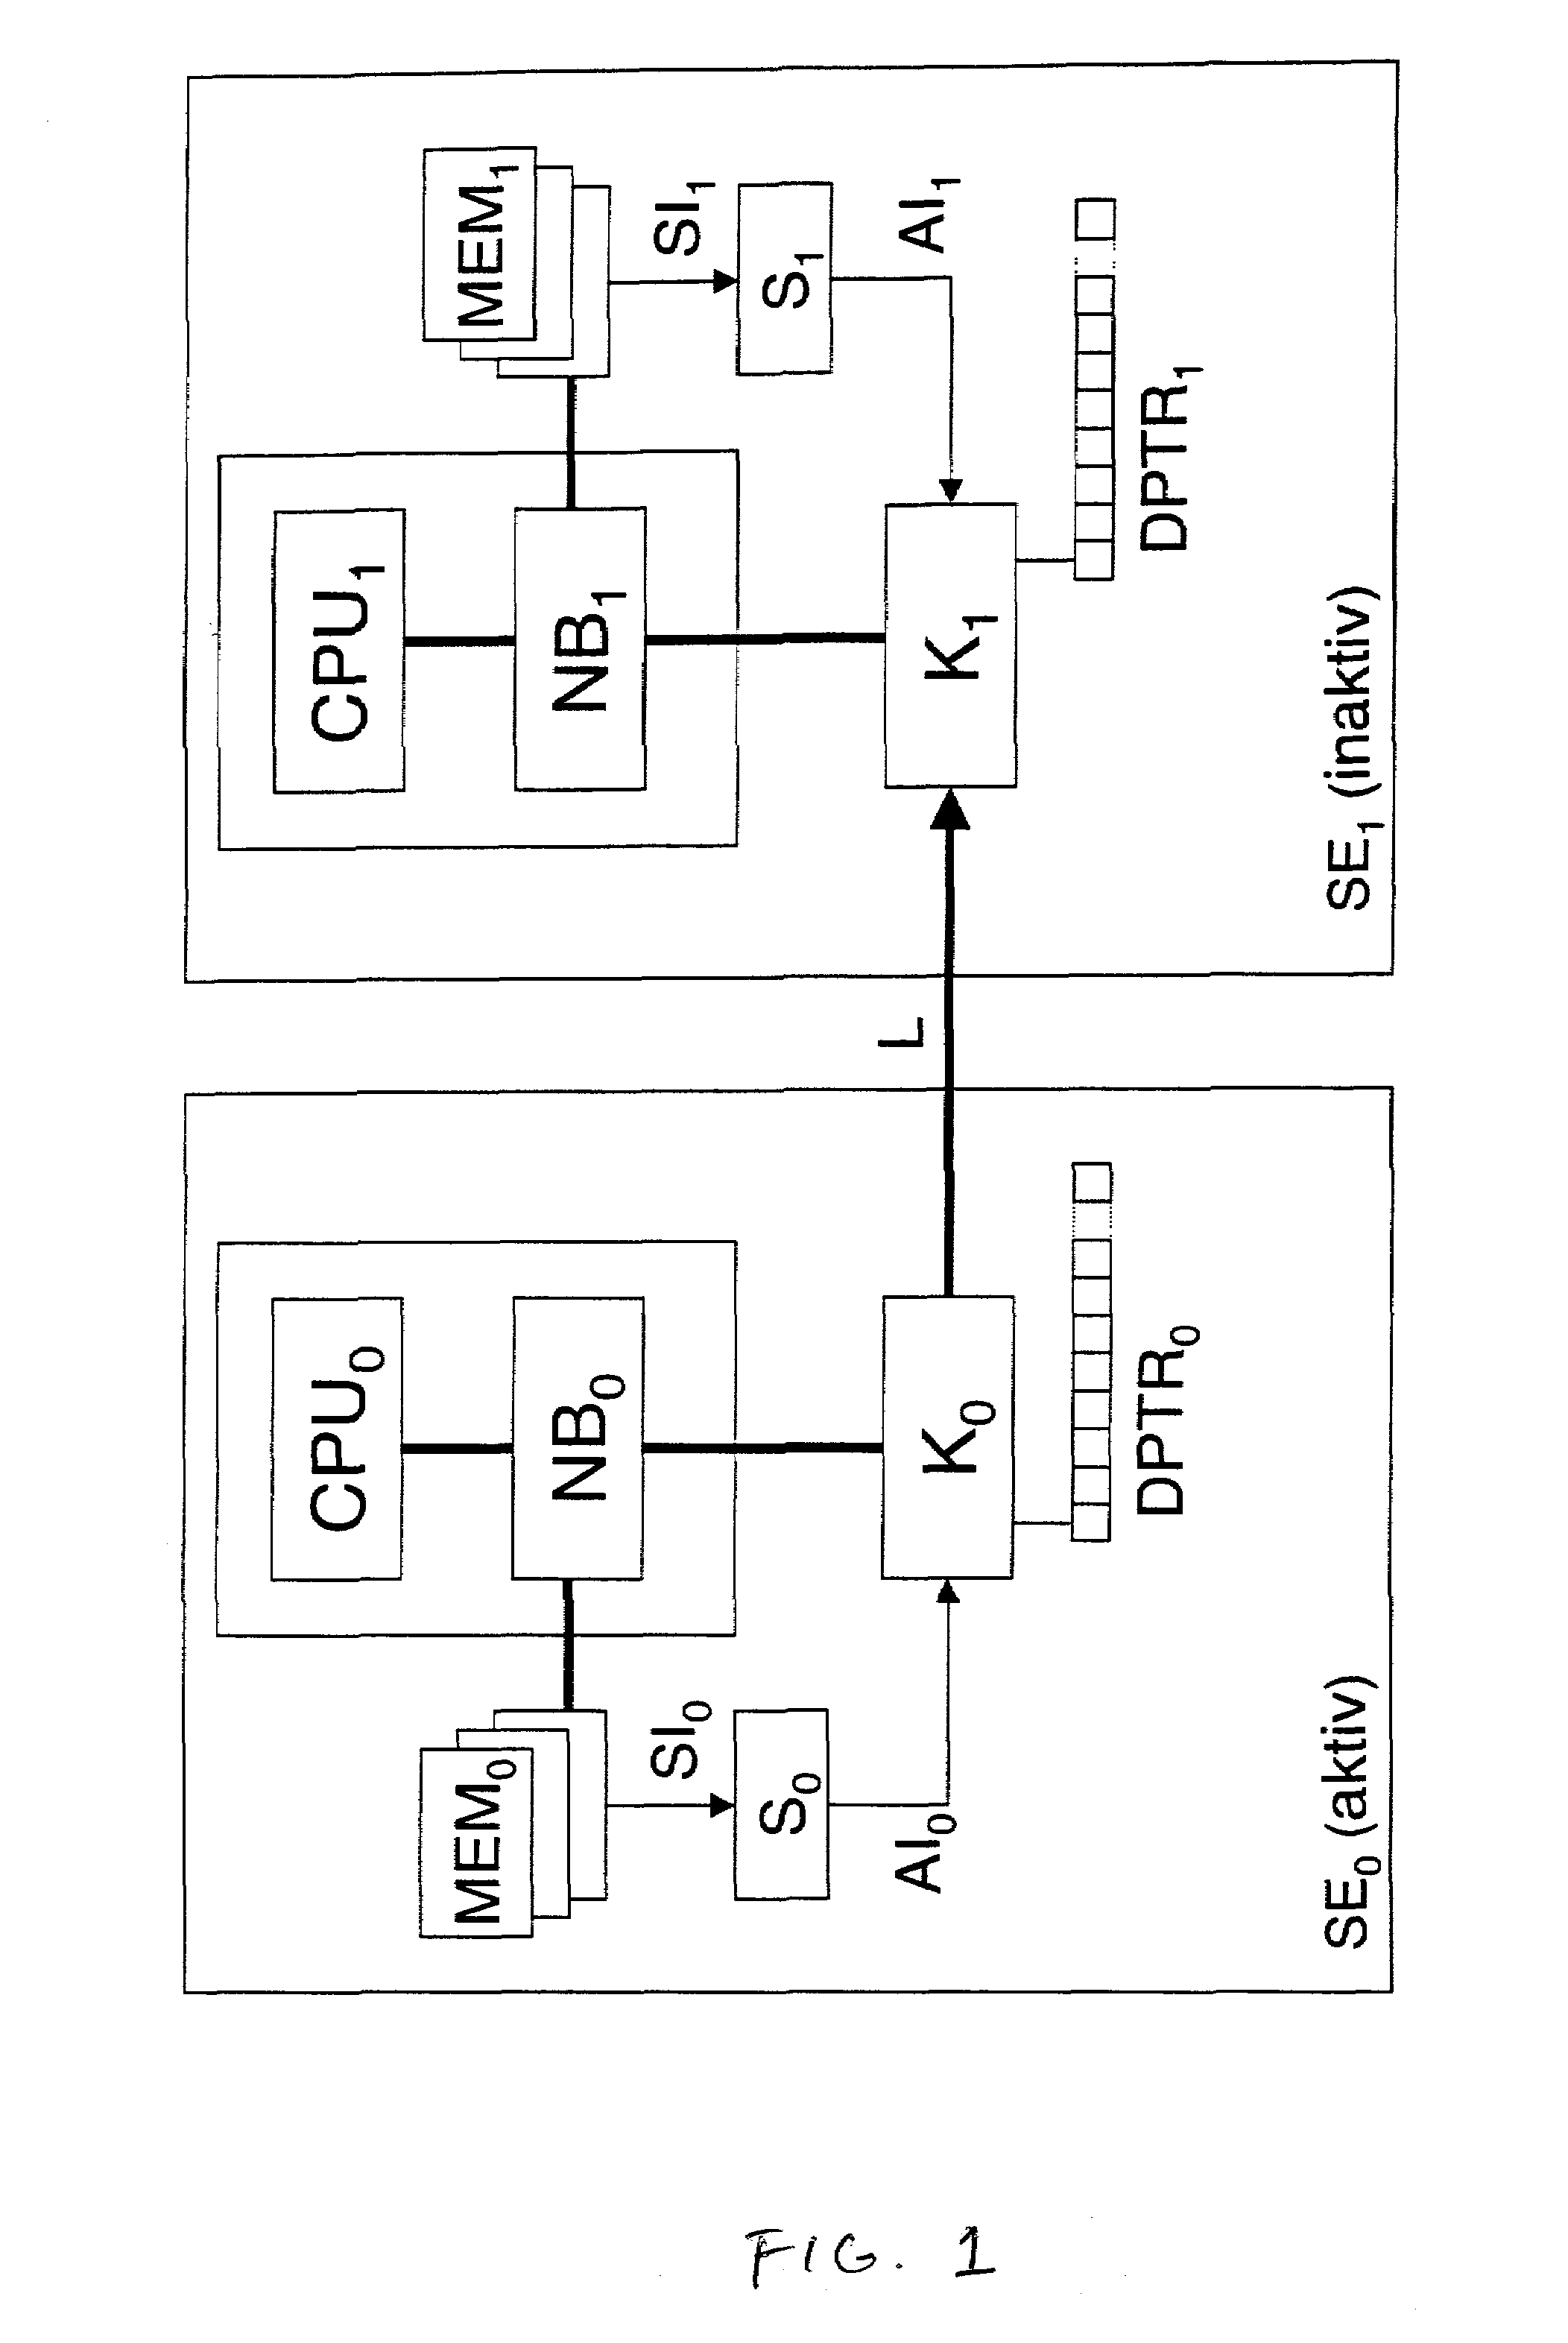 System and method for establishing consistent memory contents in redundant systems